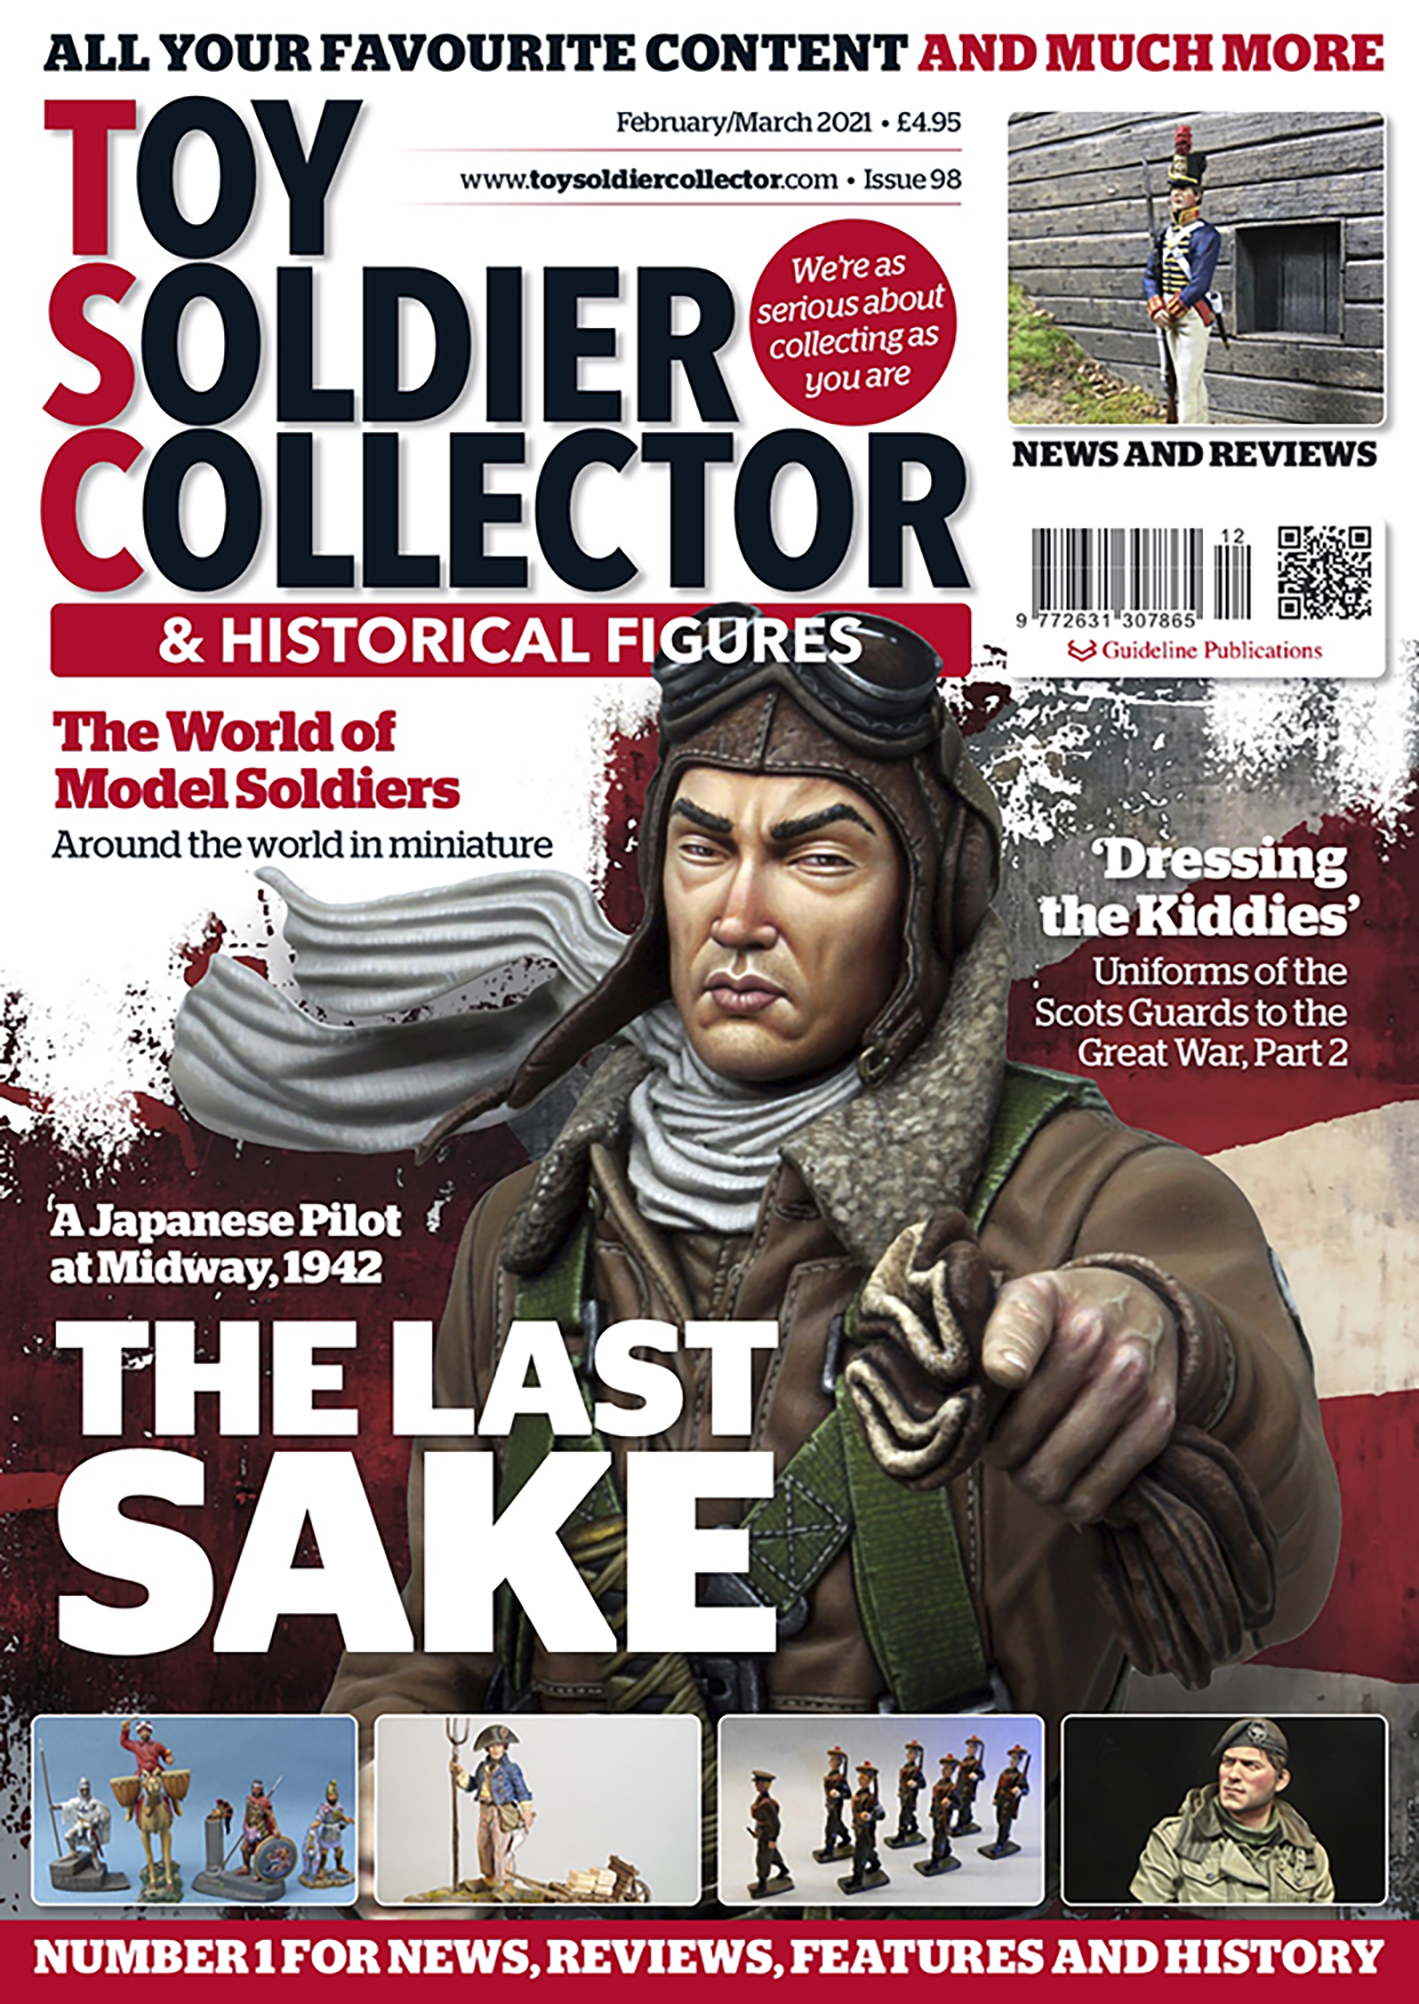 Guideline Publications Toy Soldier Collector #98 Feb/March 21 - Issue 98 